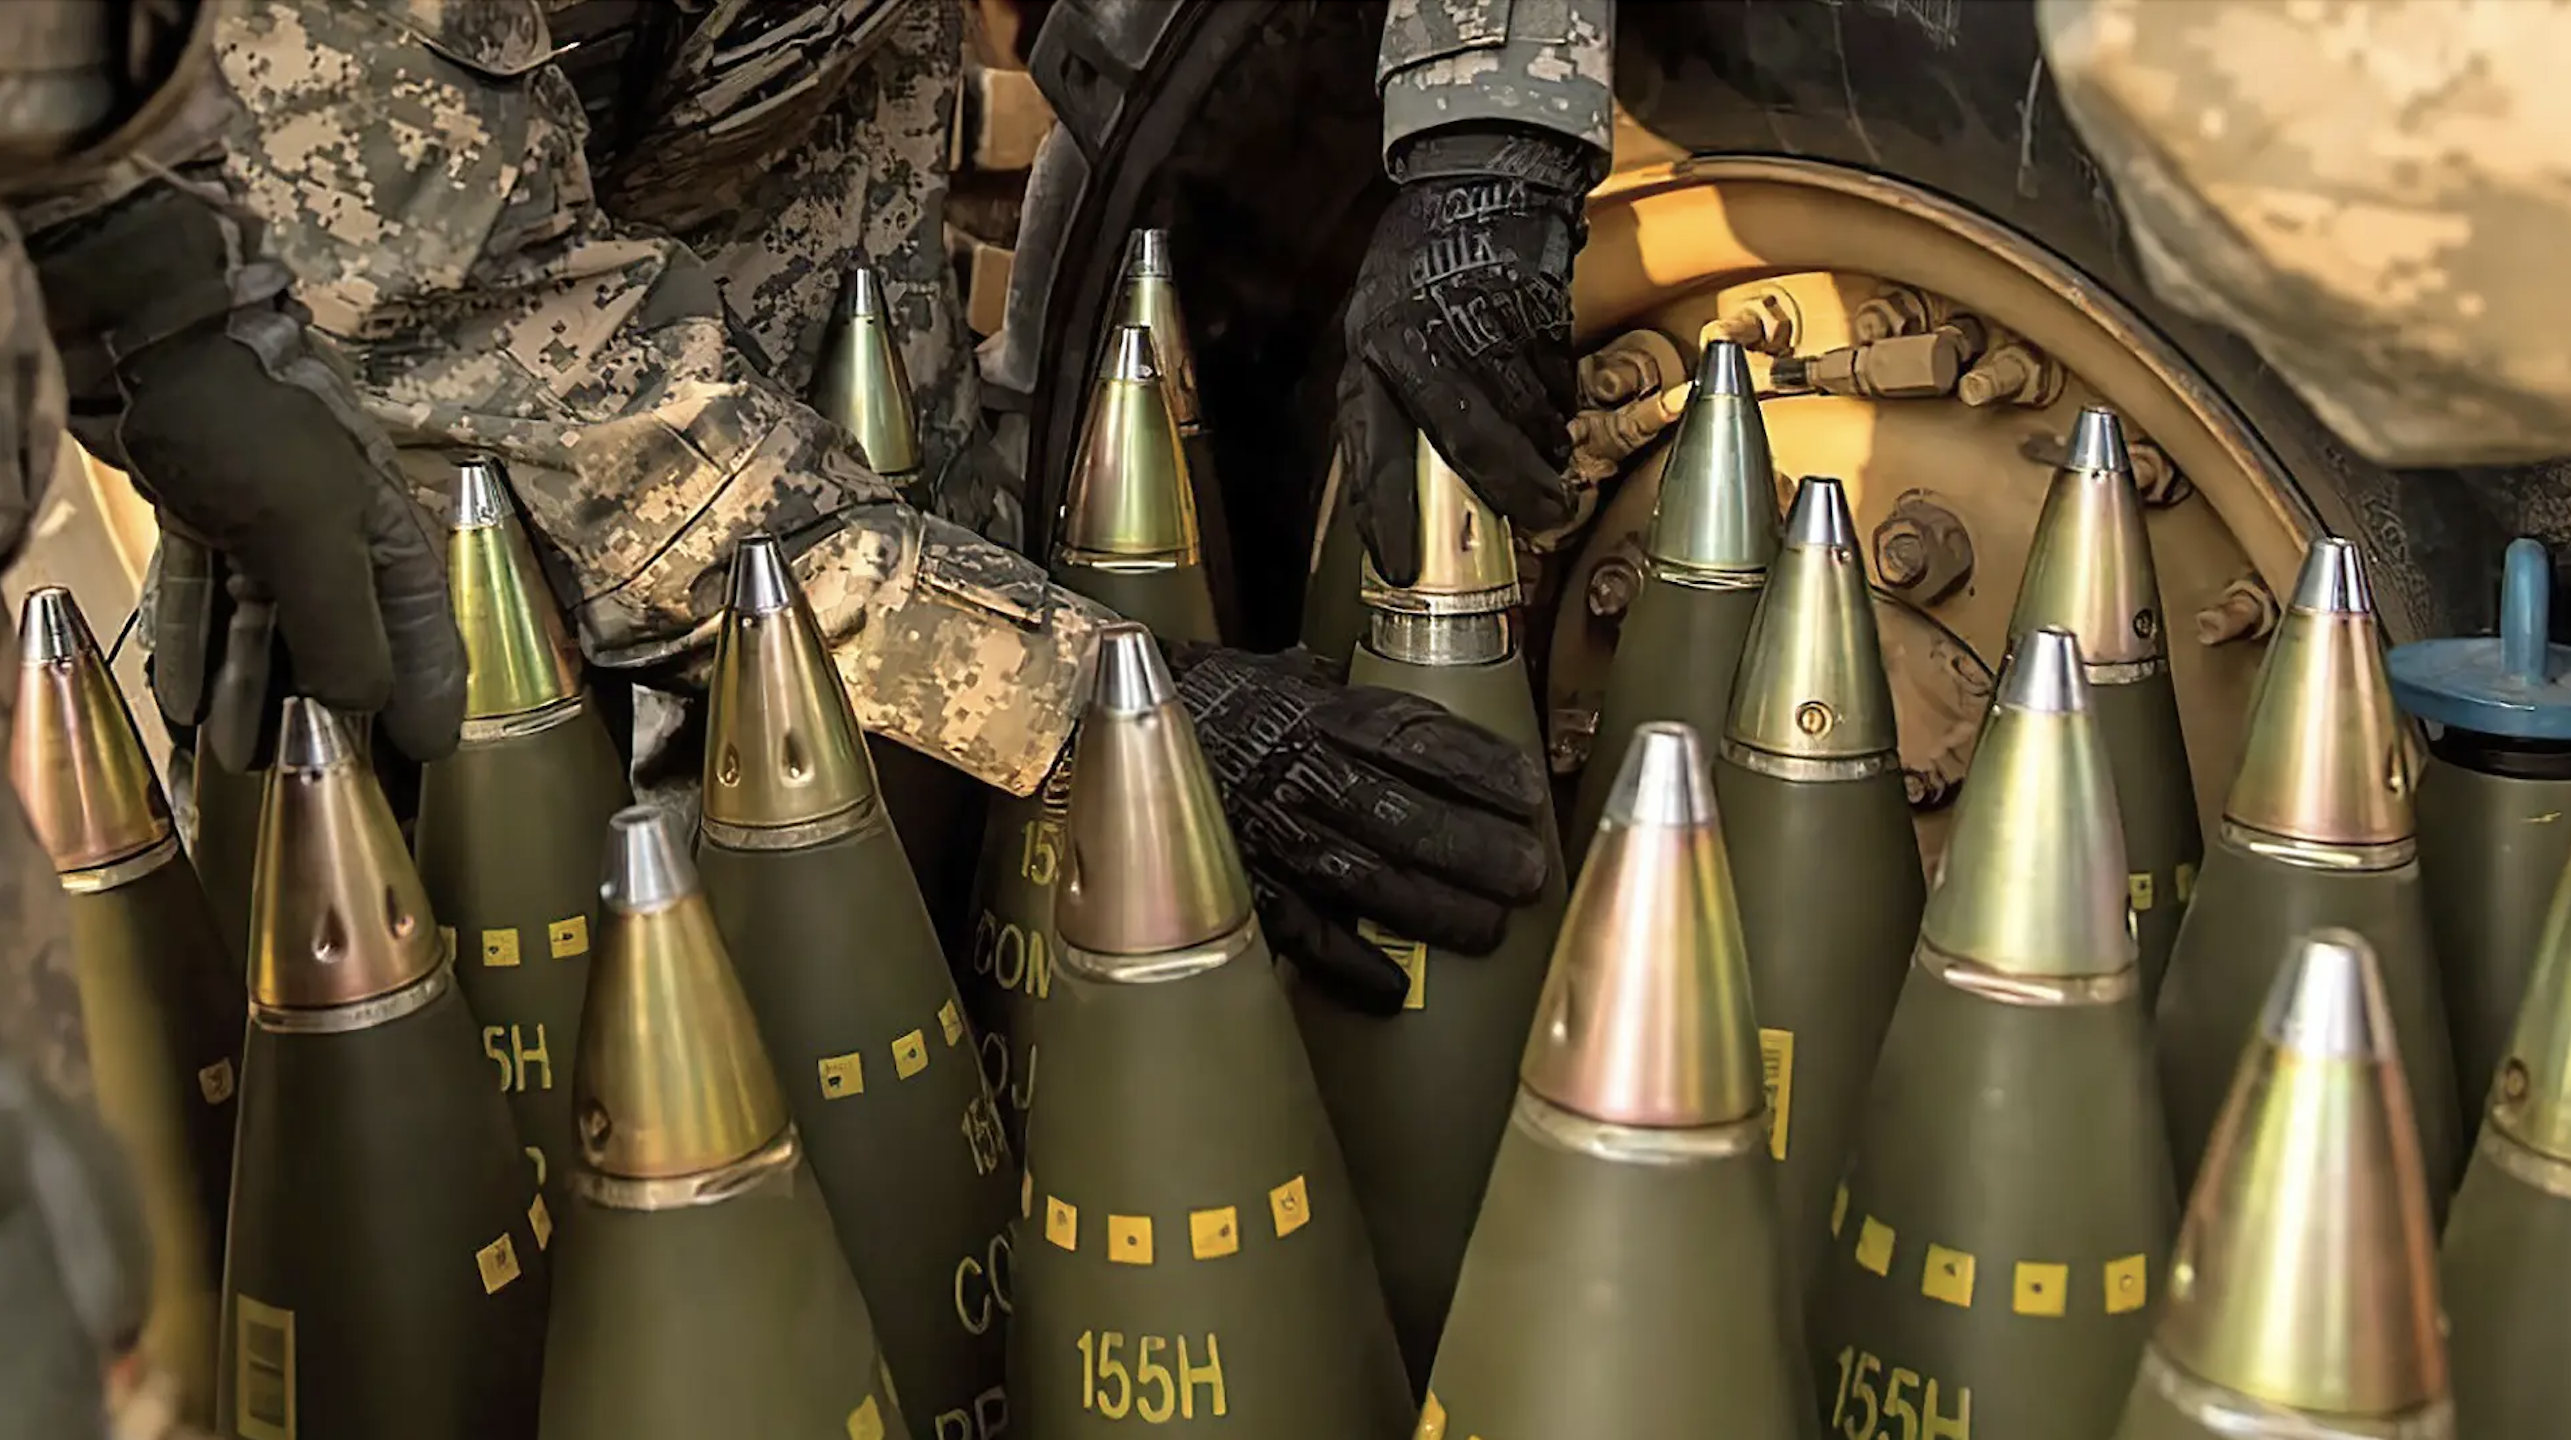 Ukraine Has Received Over A Million Artillery Rounds From The U.S.